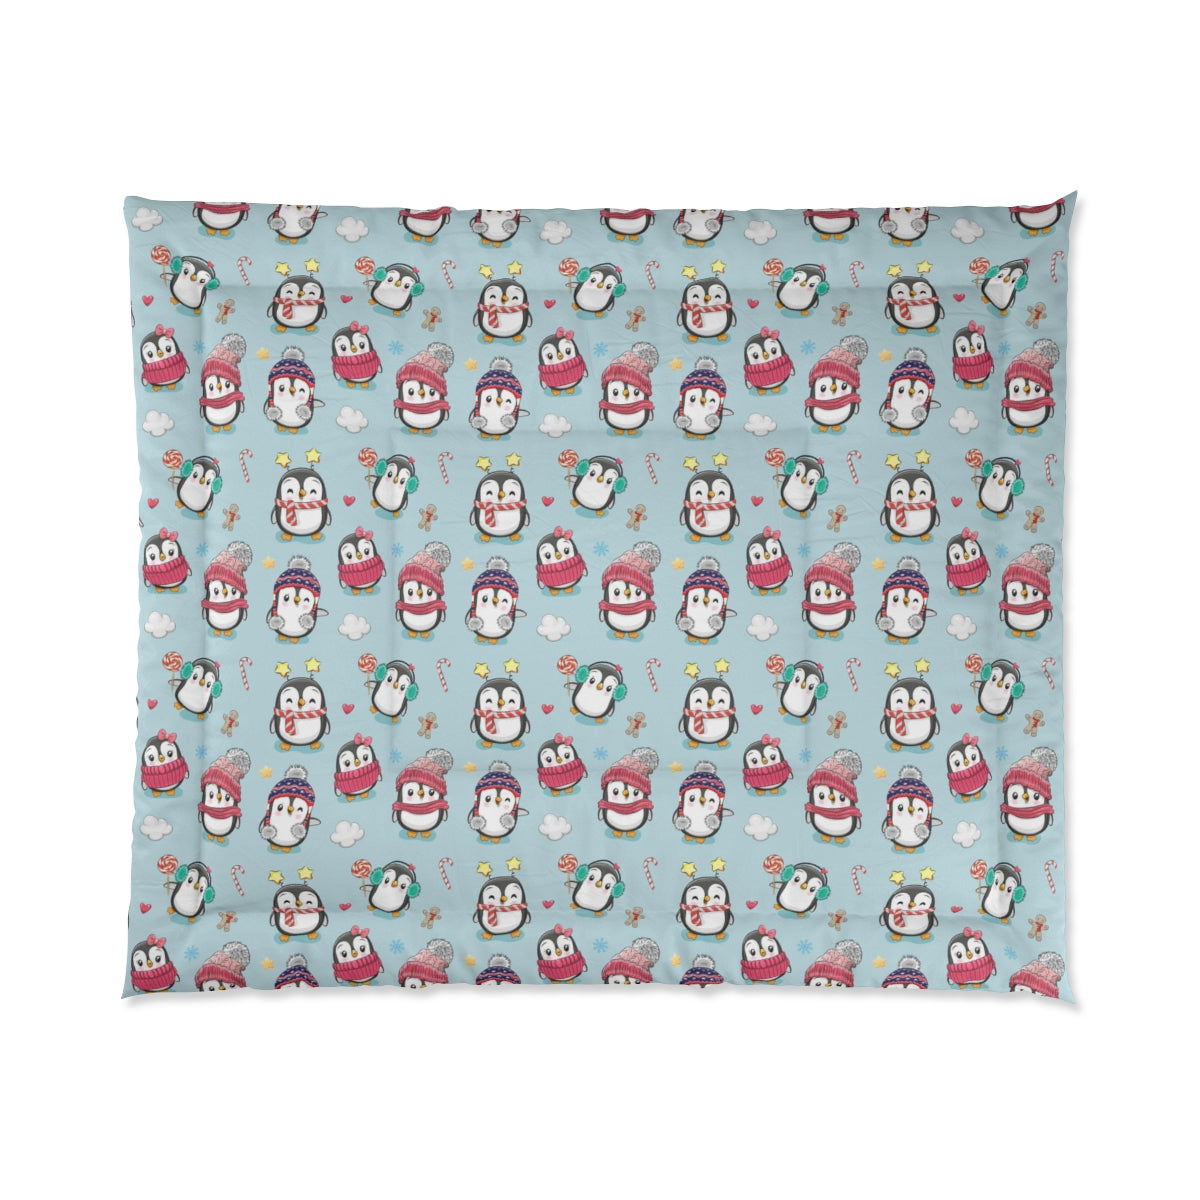 Penguins in Winter Clothes Comforter